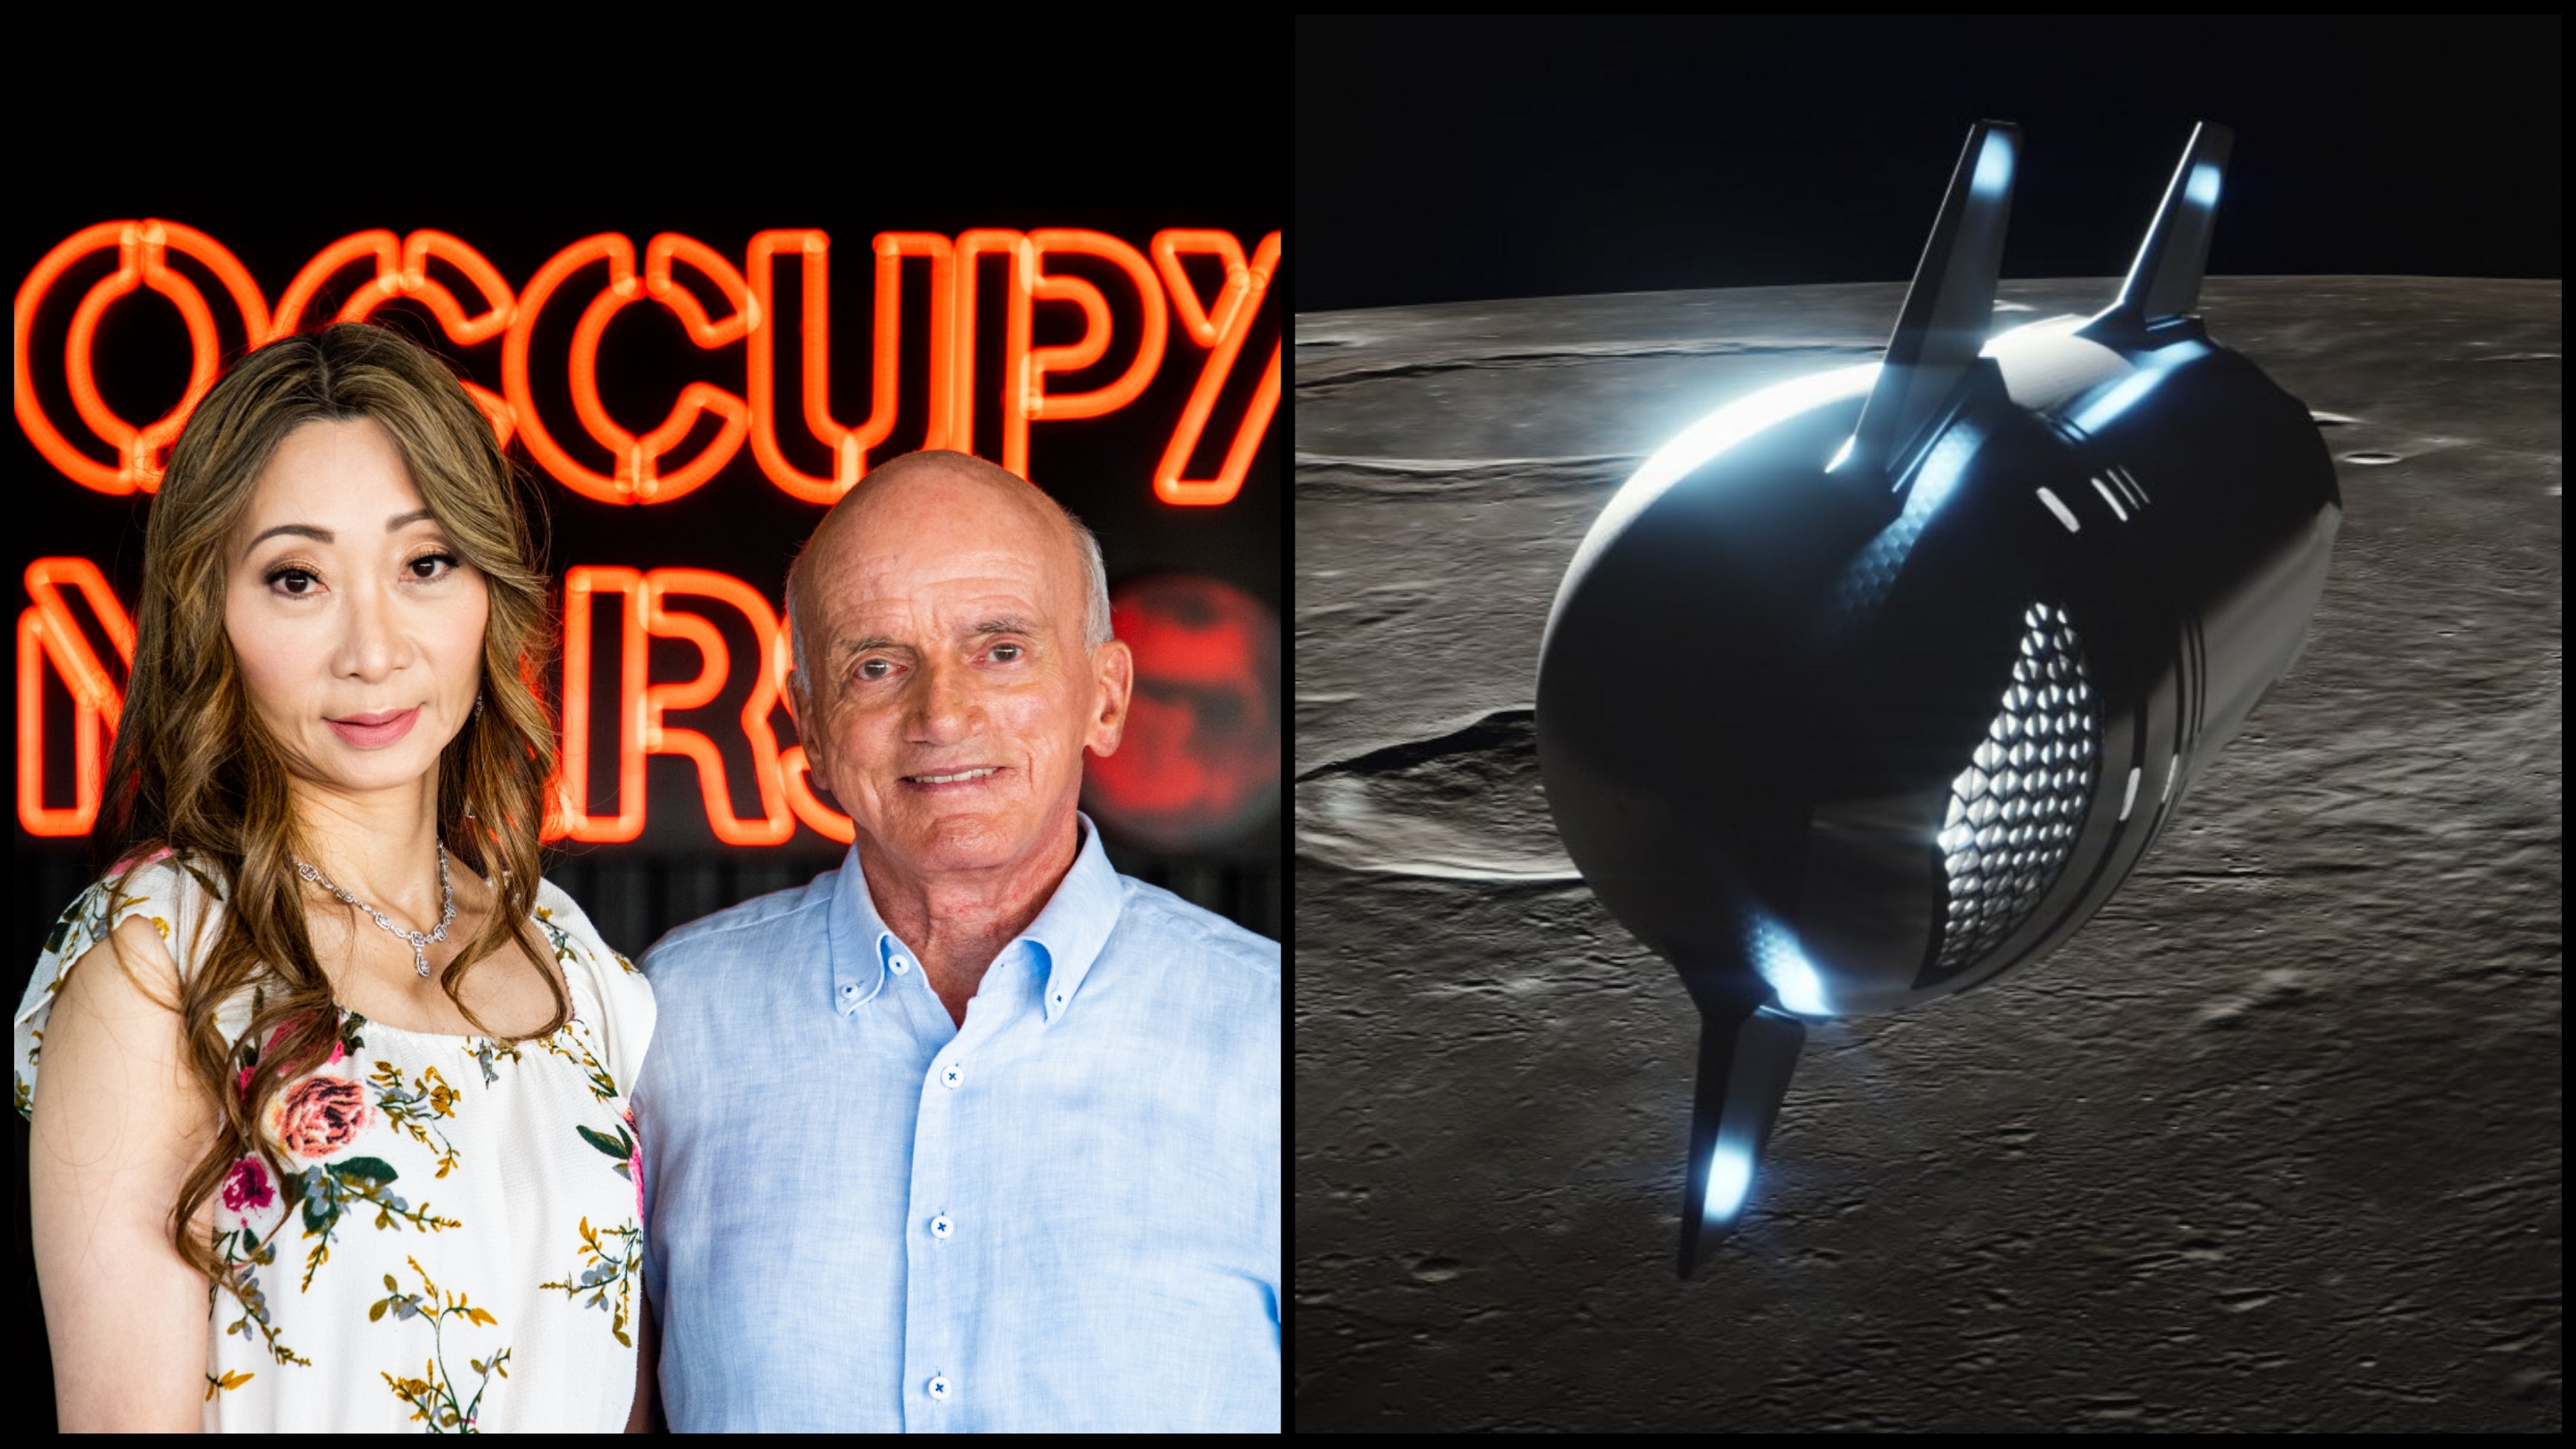 Space Tourism Pioneer Dennis Tito Books A Voyage Around The Moon On SpaceX Starship